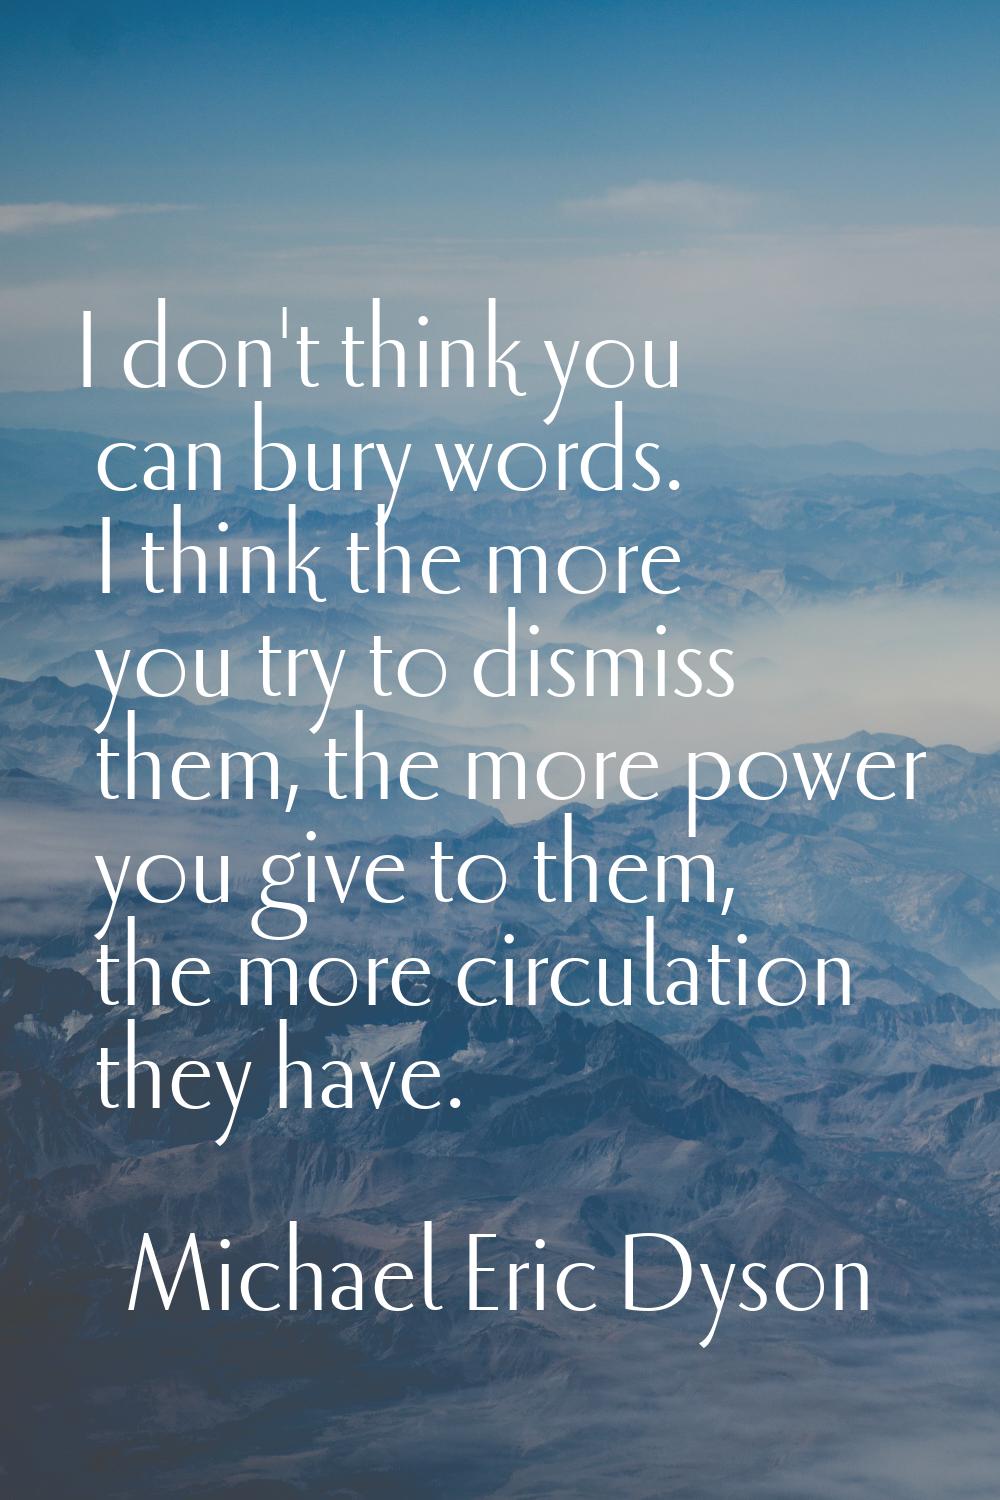 I don't think you can bury words. I think the more you try to dismiss them, the more power you give